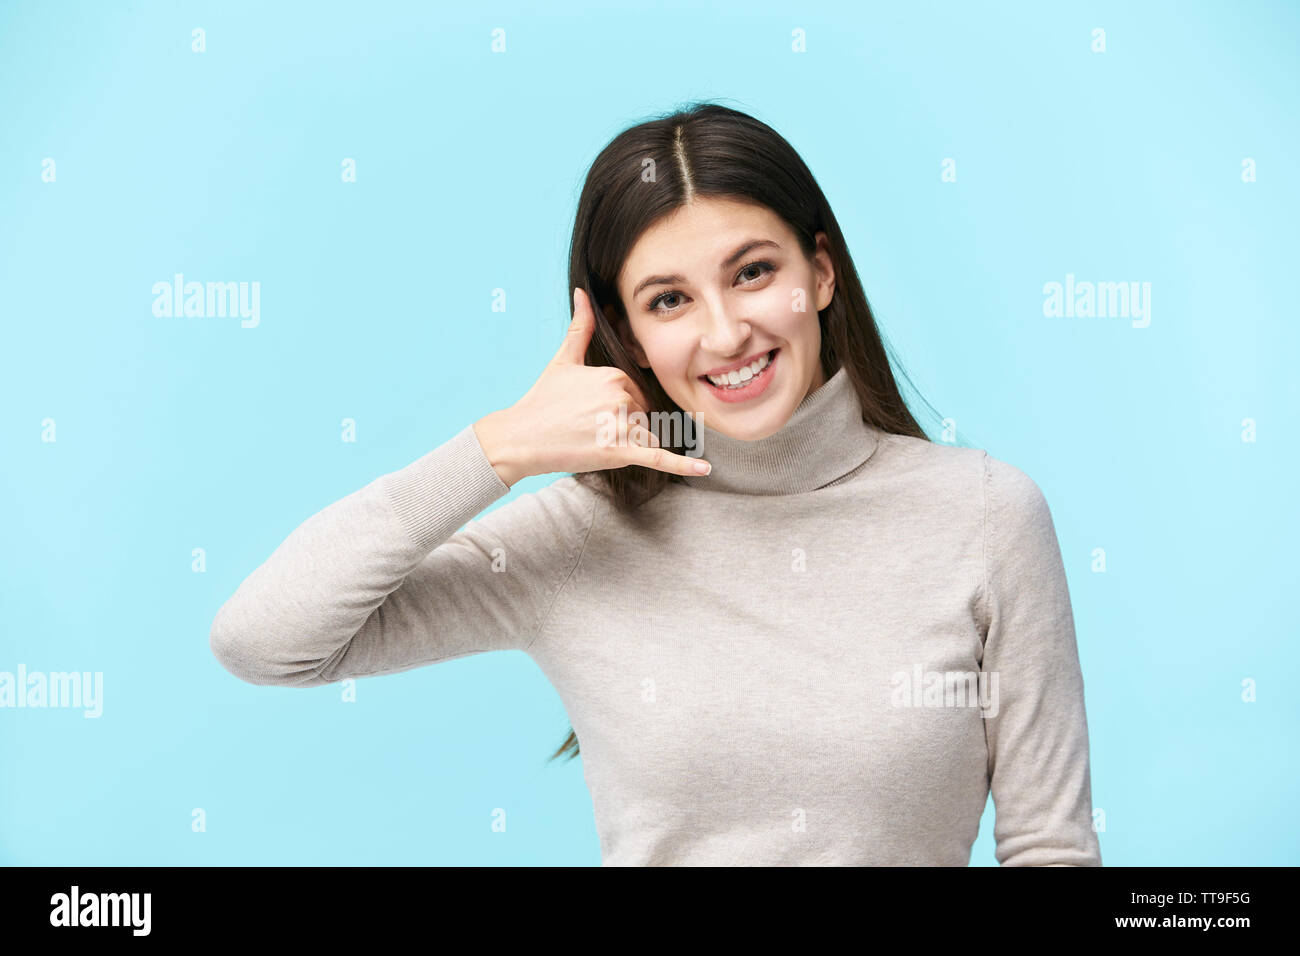 beautiful young caucasian woman making a call me hand sign, looking at camera smiling, isolated on blue background Stock Photo